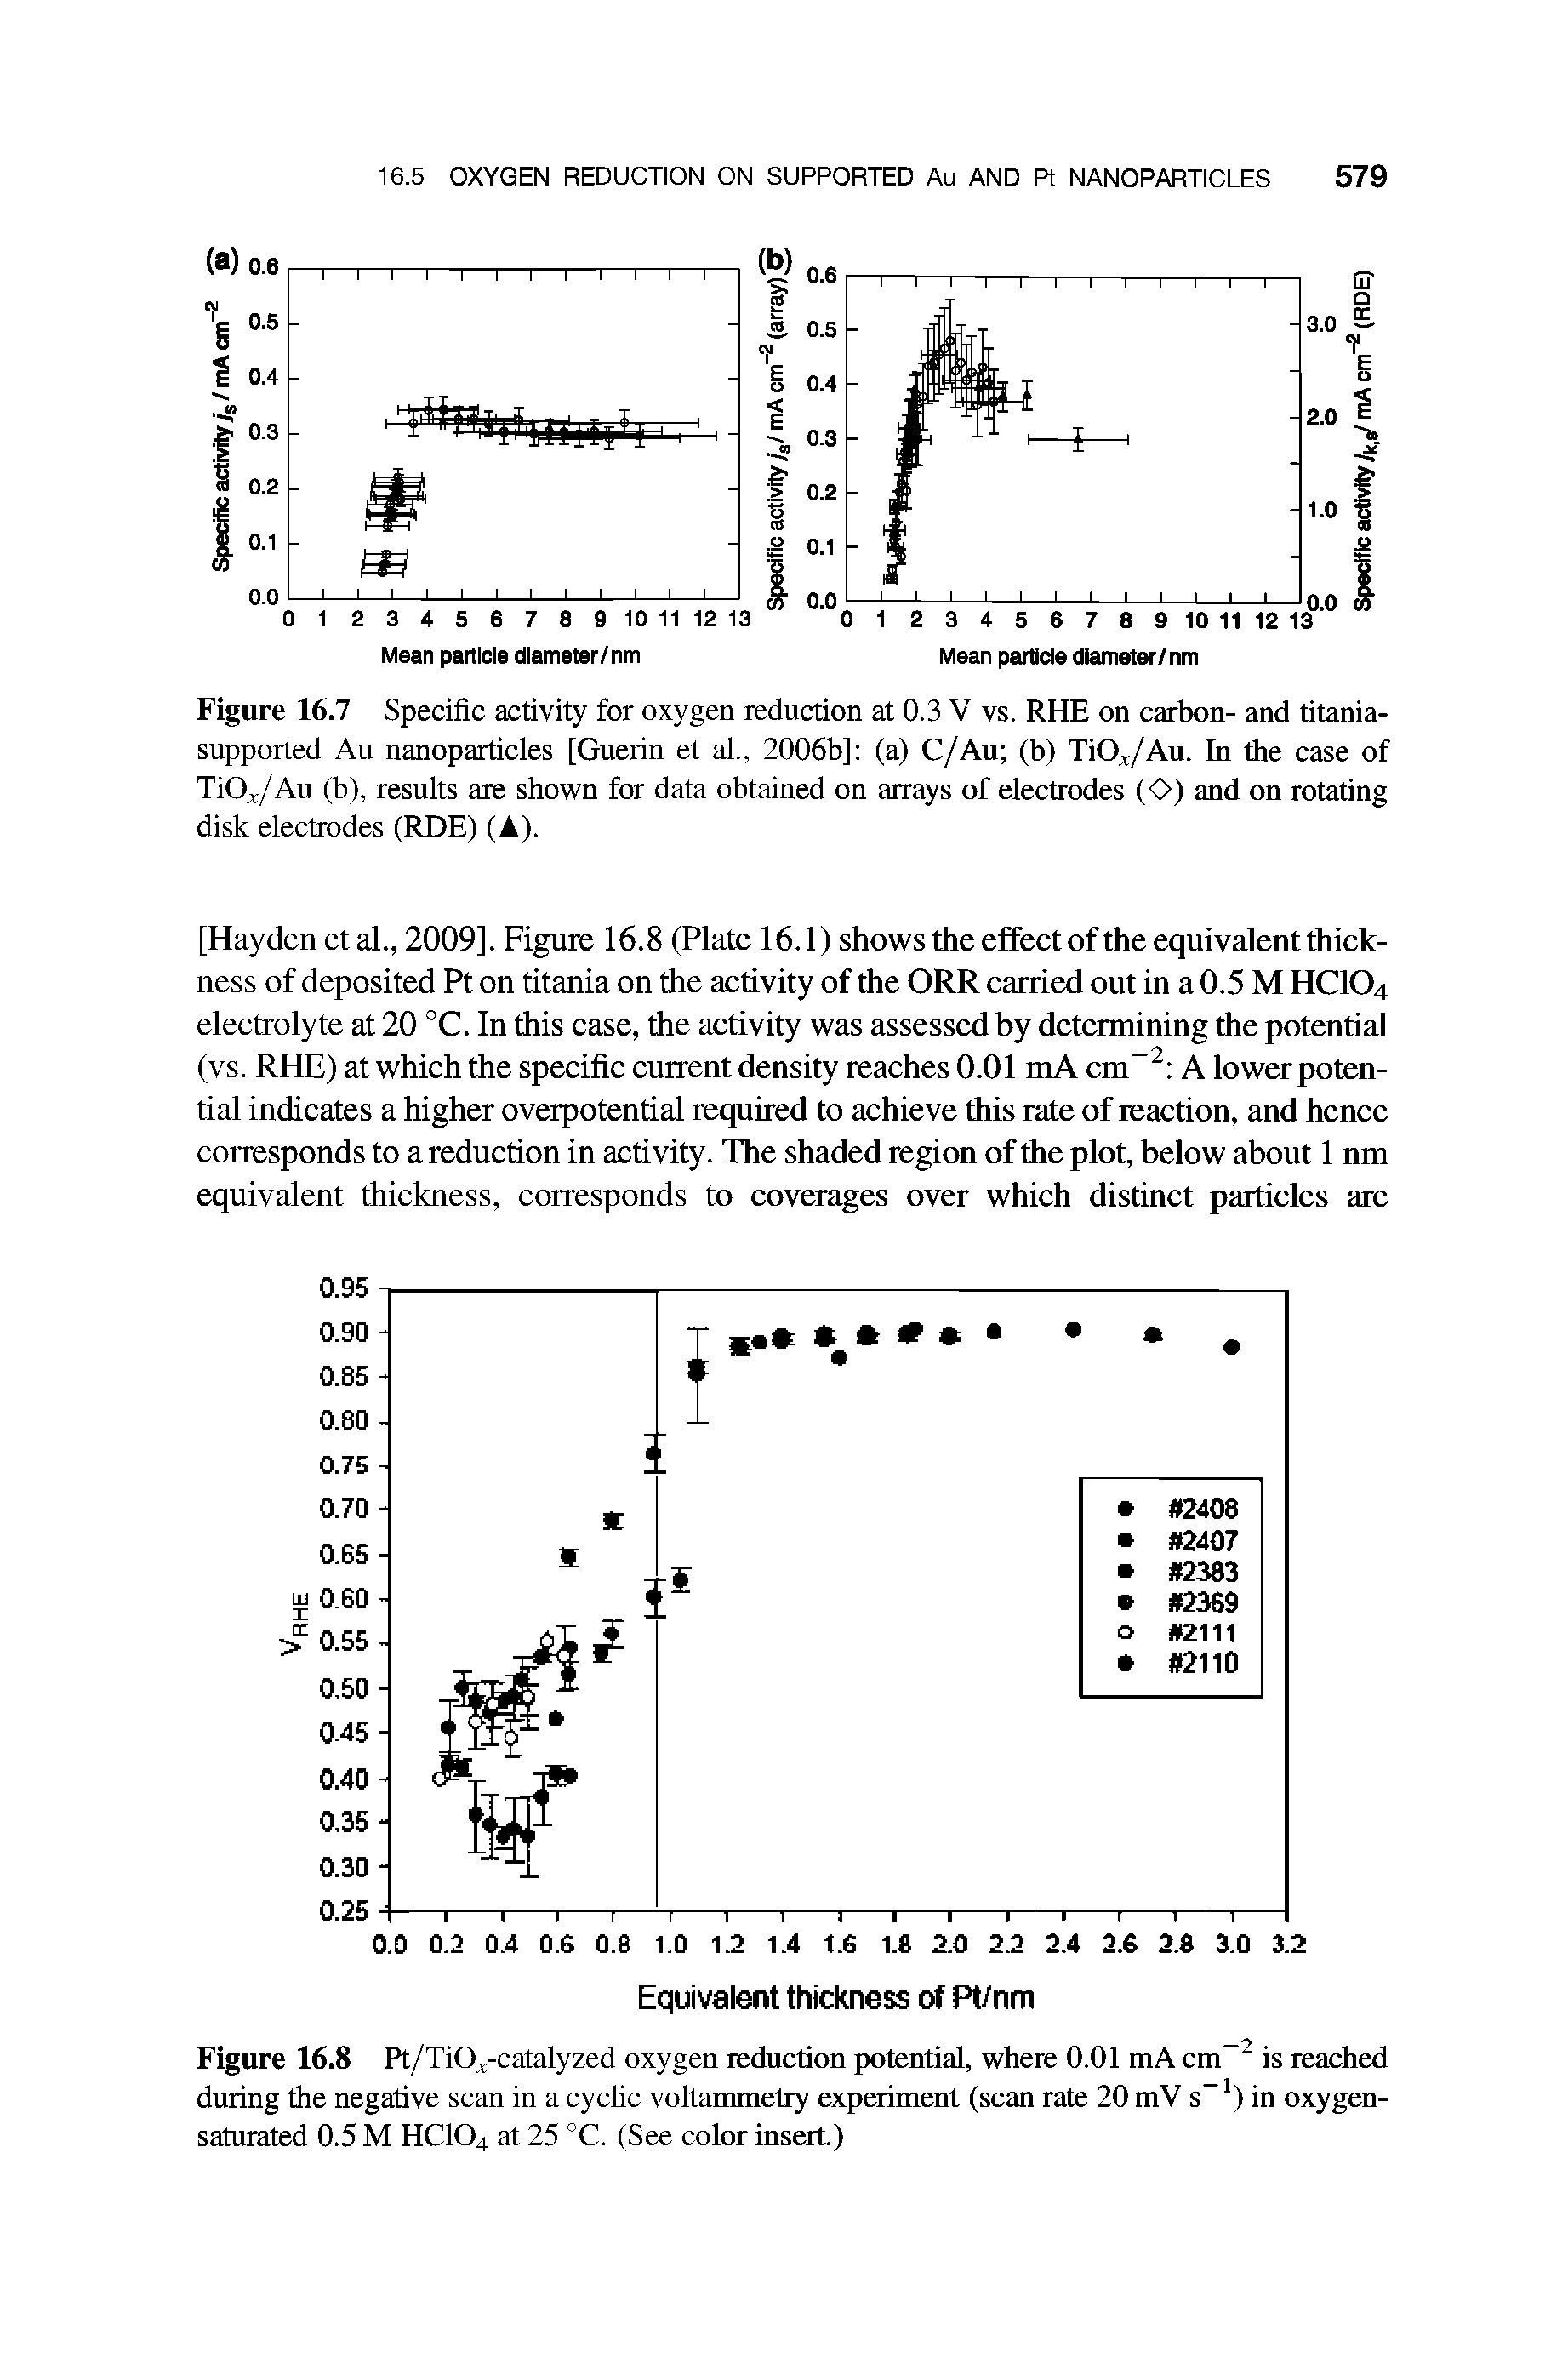 Figure 16.8 Pt/TiO c-catalyzed oxygen reduction potential, where 0.01 mA cm is reached during the negative scan in a cyclic voltammetry experiment (scan rate 20 mV s ) in oxygen-saturated 0.5 M HCIO4 at 25 °C. (See color insert.)...